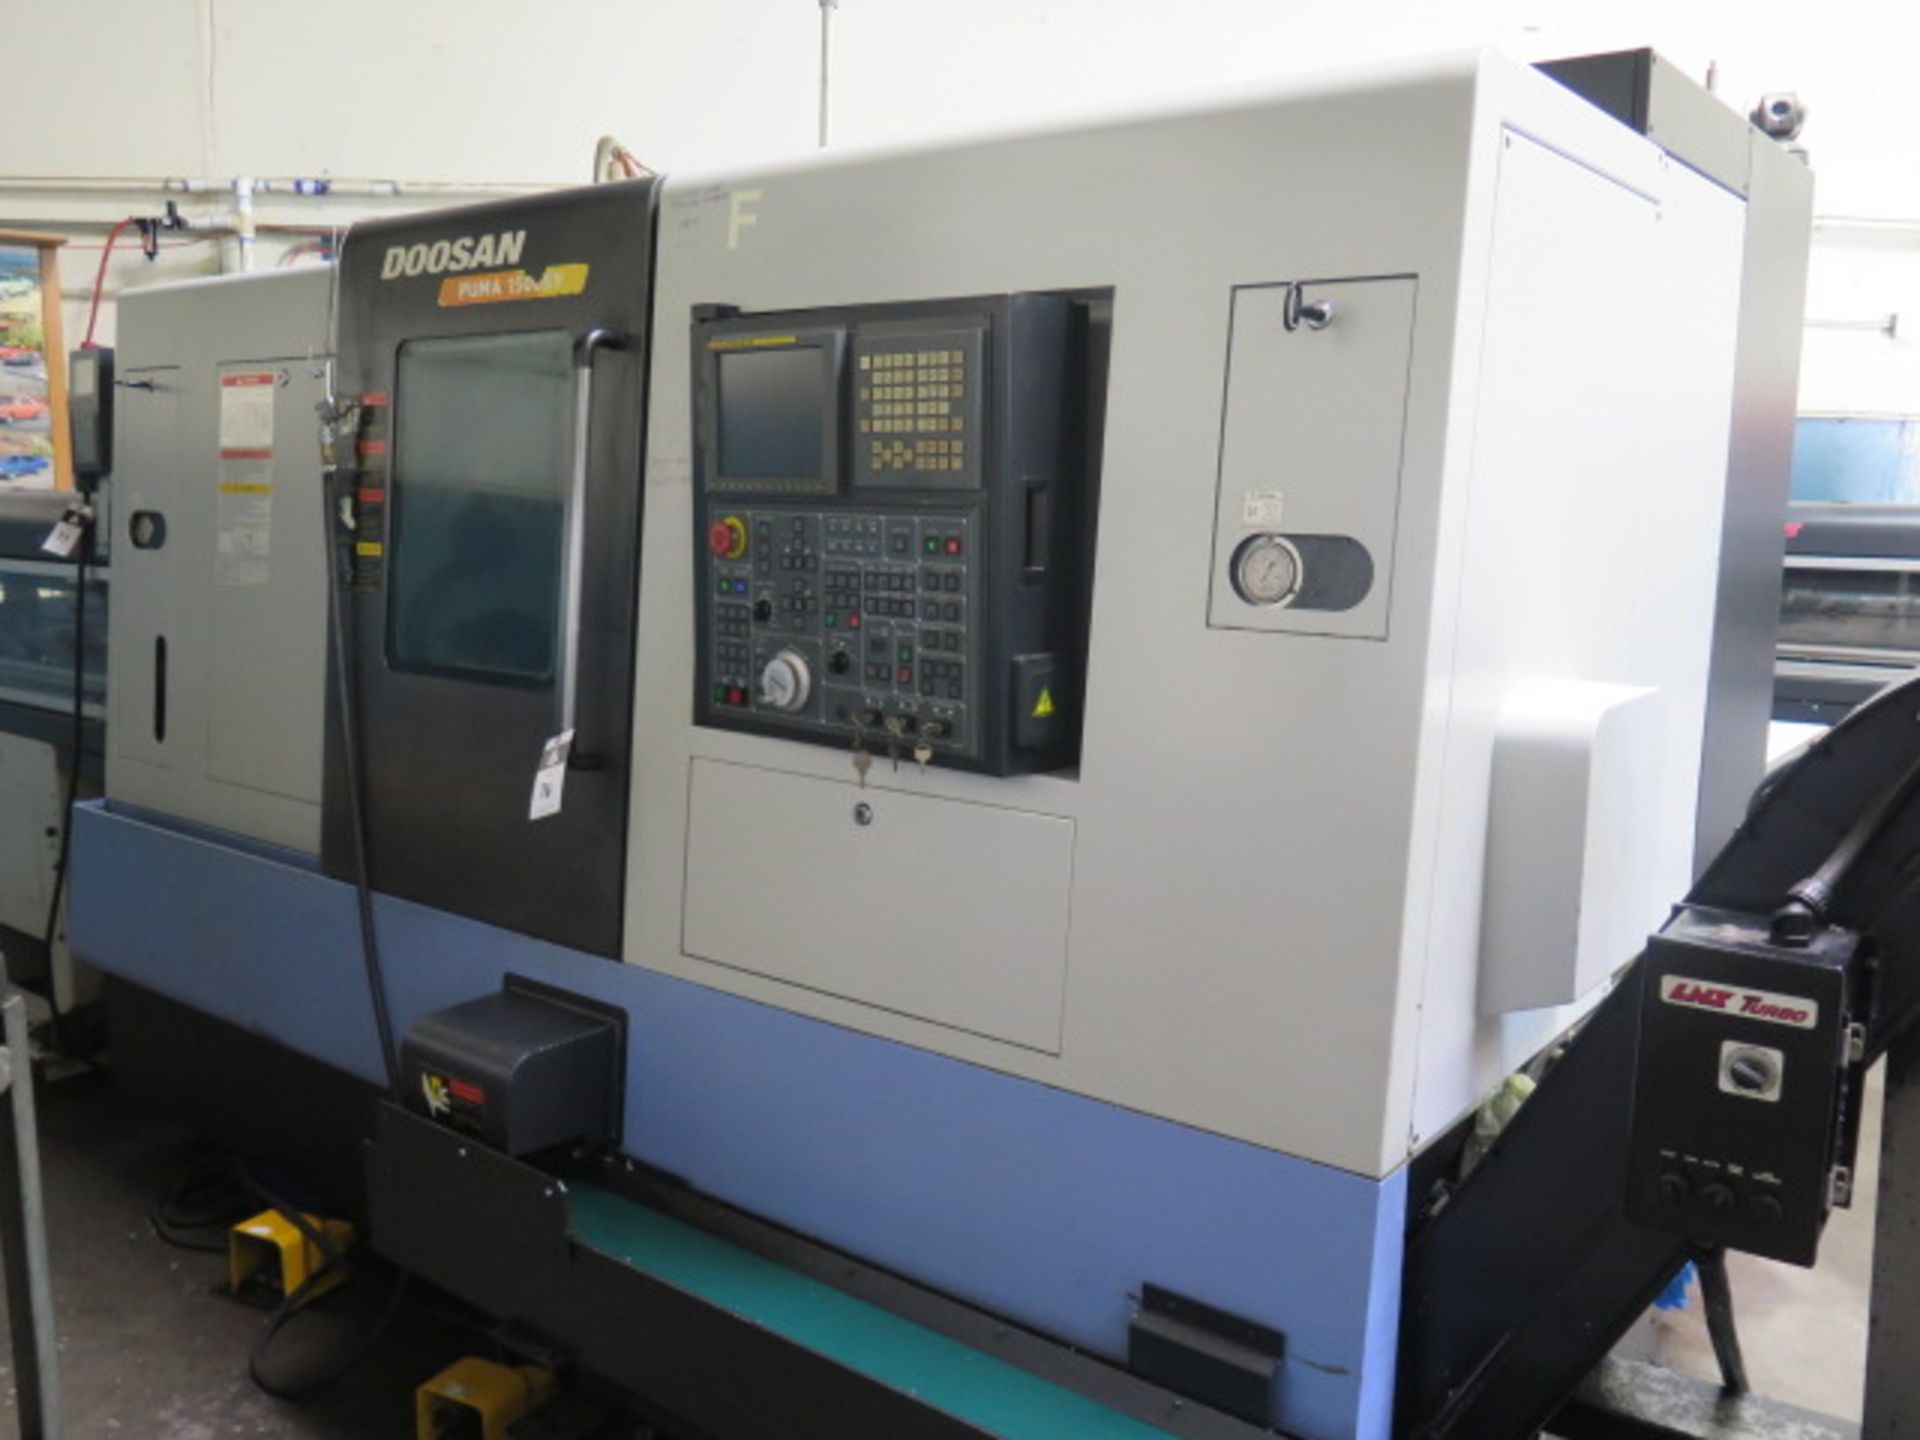 2008 Doosan PUMA 1500SY 5-Axis Twin Spindle Live Turret CNC Turning Center s/n P150SY1041,SOLD AS IS